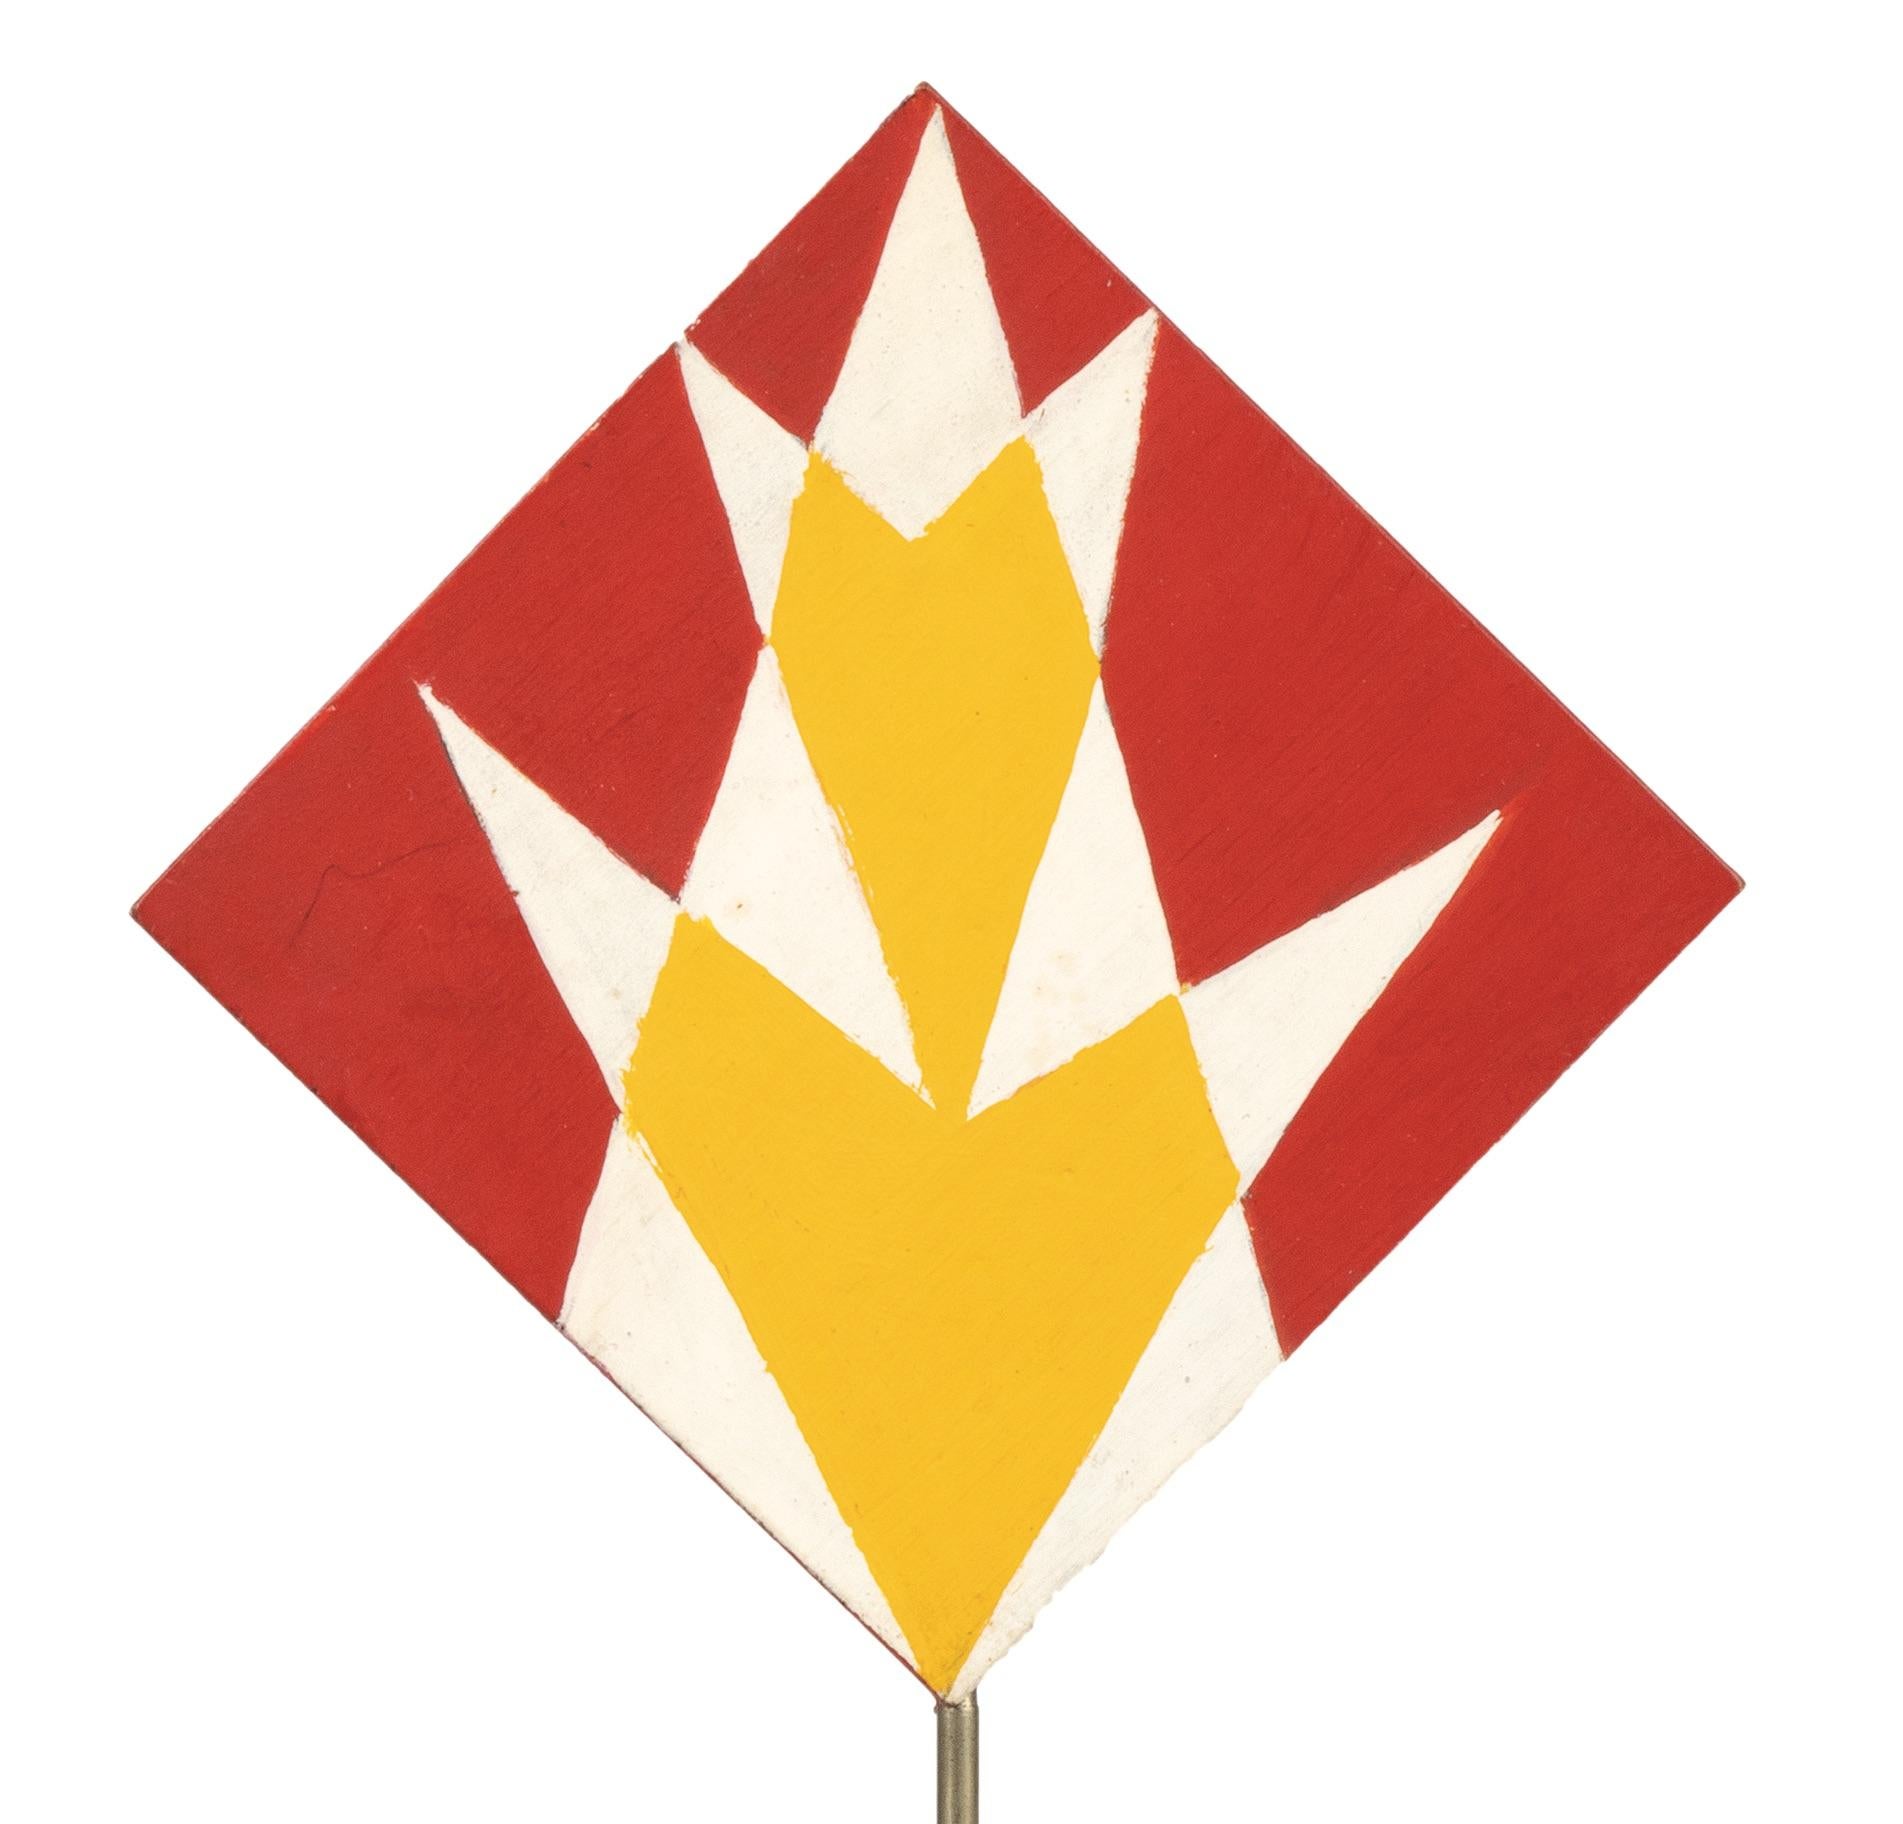 The 'Red and Yellow Triangles'  by Giacomo Balla (1871-1958), geometric pattern with yellow and red triangles down and up (recto and verso), realized in the 1930s.

Tempera on wood, aluminium structure and plastic base, 22 x 10,7 cm (23,5 x 10,7 cm